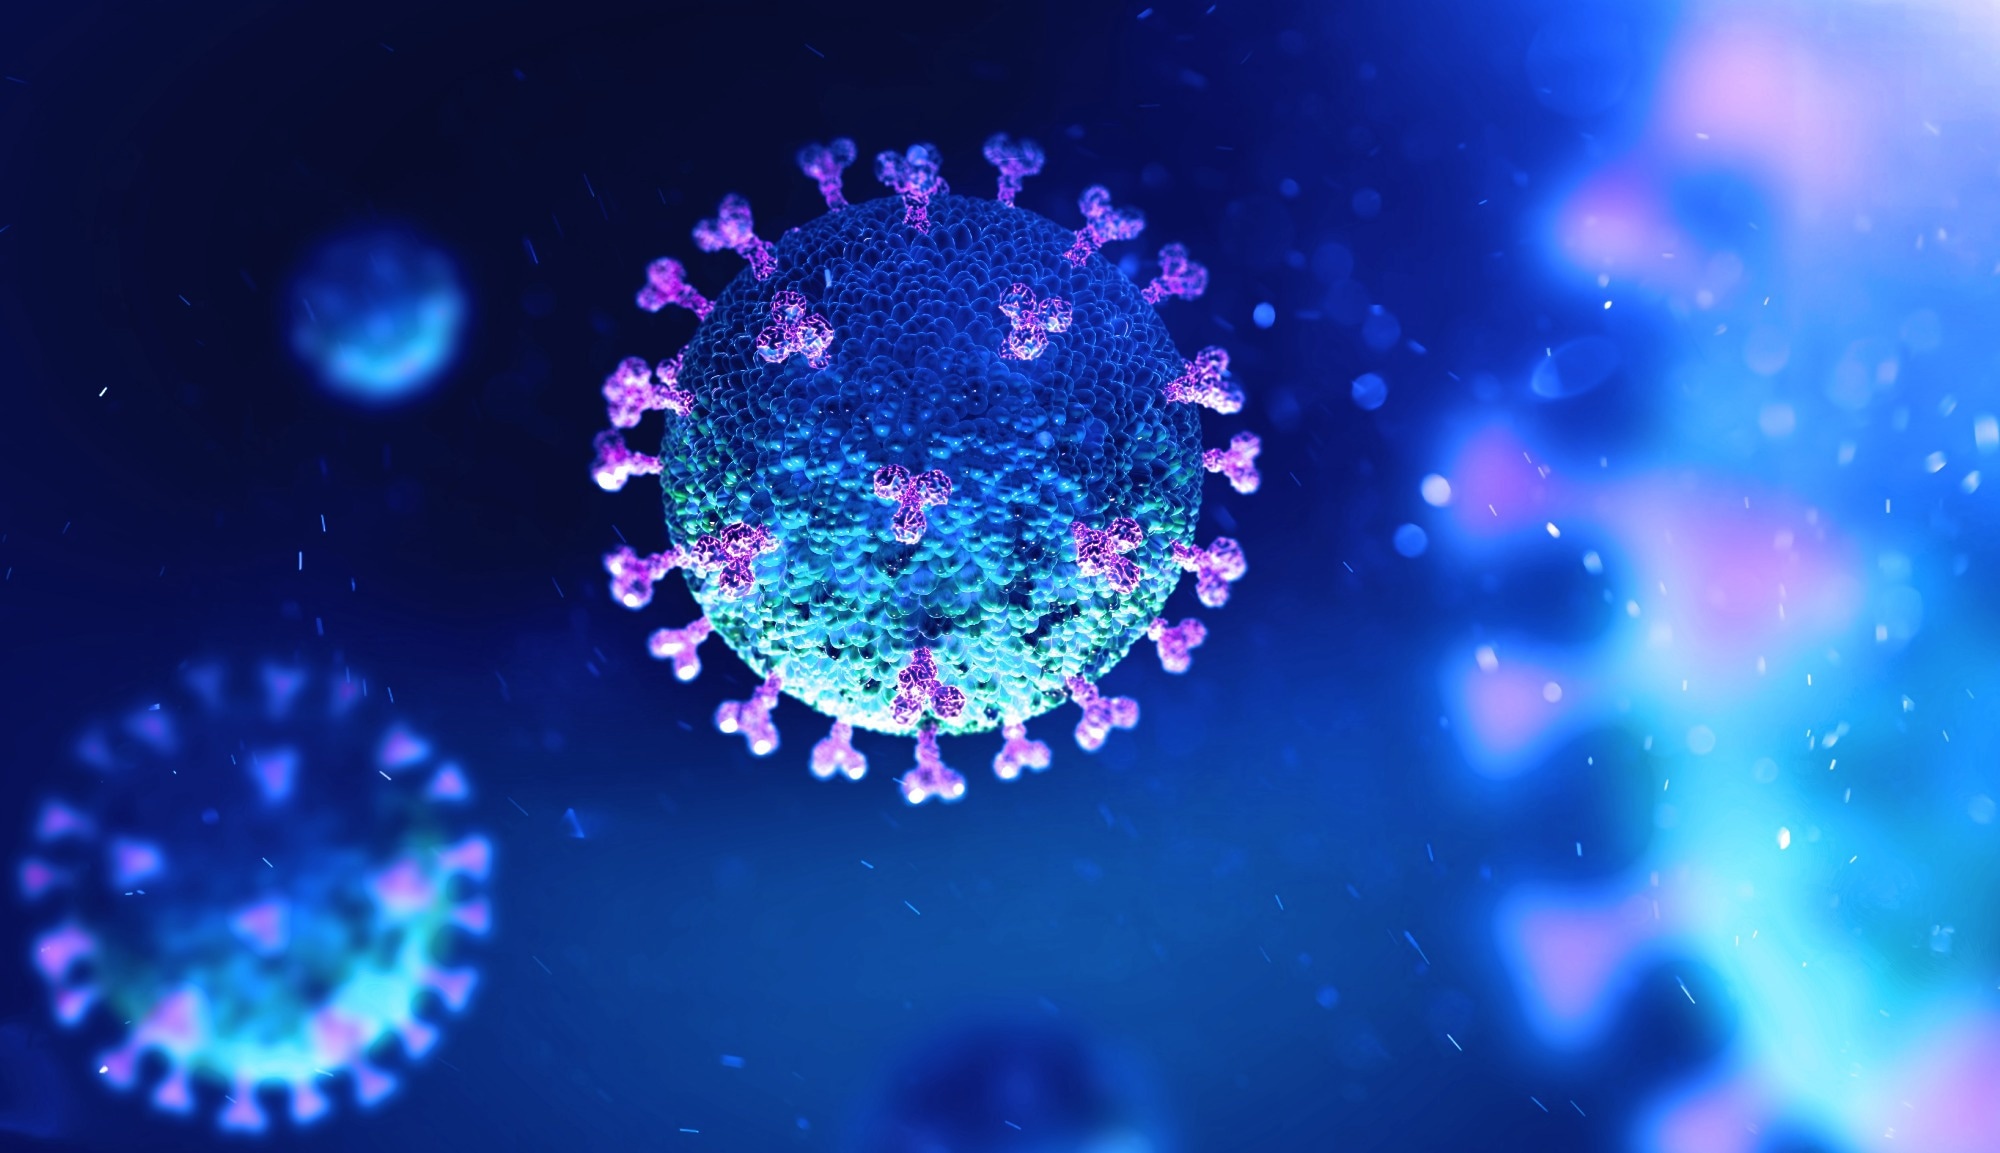 Study: Dynamics of SARS-CoV-2 VOC neutralization and novel mAb reveal protection against Omicron. Image Credit: Andrii Vodolazhskyi/Shutterstock